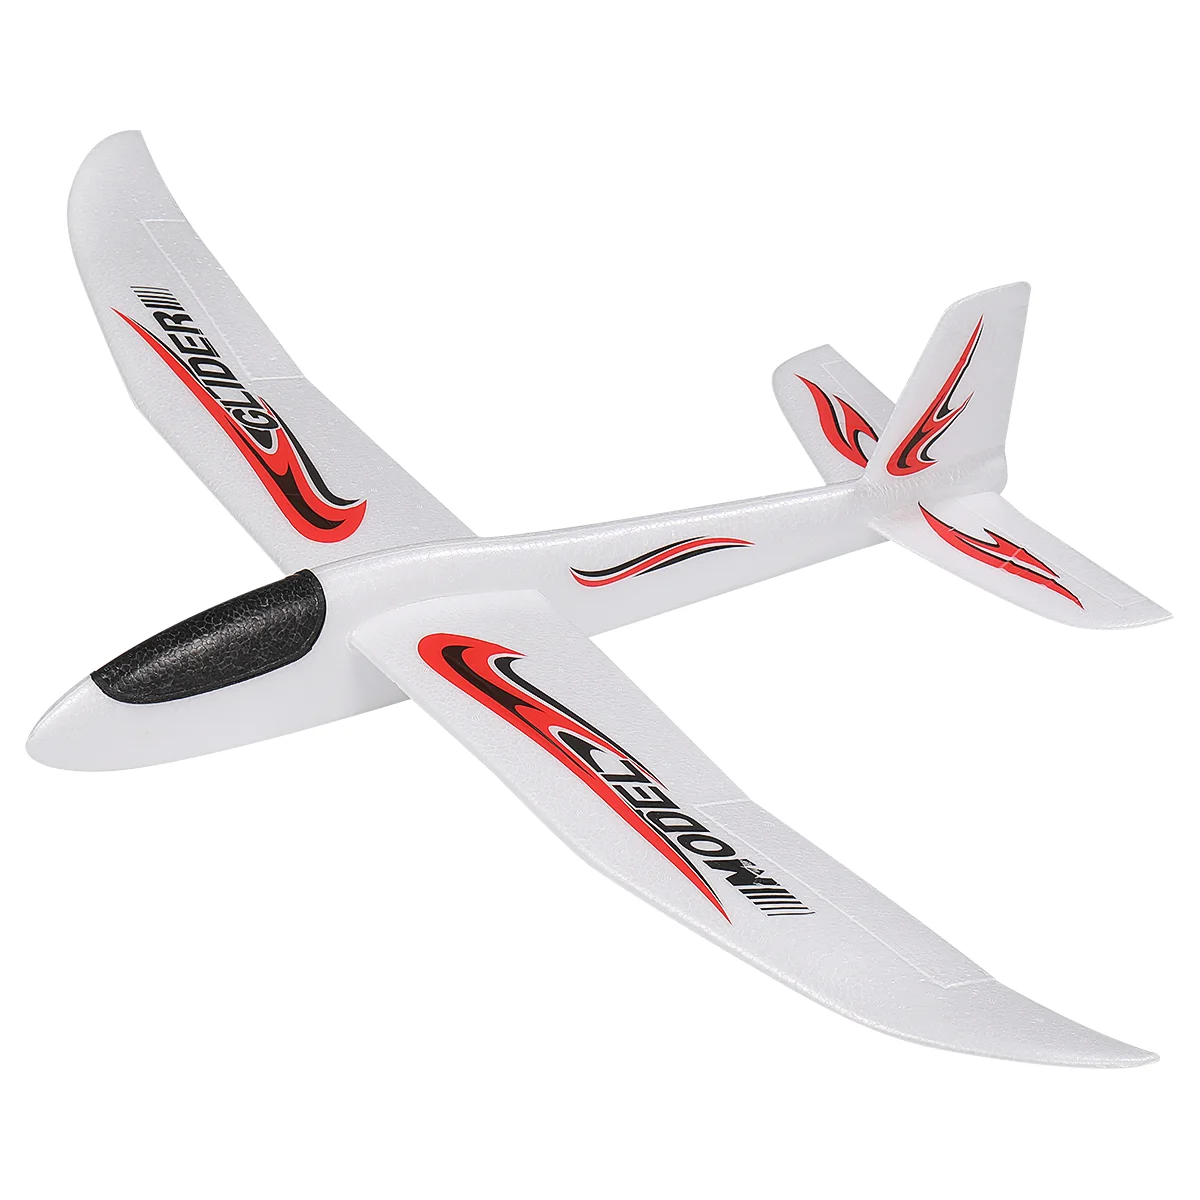 

Airplane Foam Glider Kids Toy Toys Plane Airplanes Throwing Flying Model Planes Gifts Aeroplane Party Boys Outdoor Hand Favor